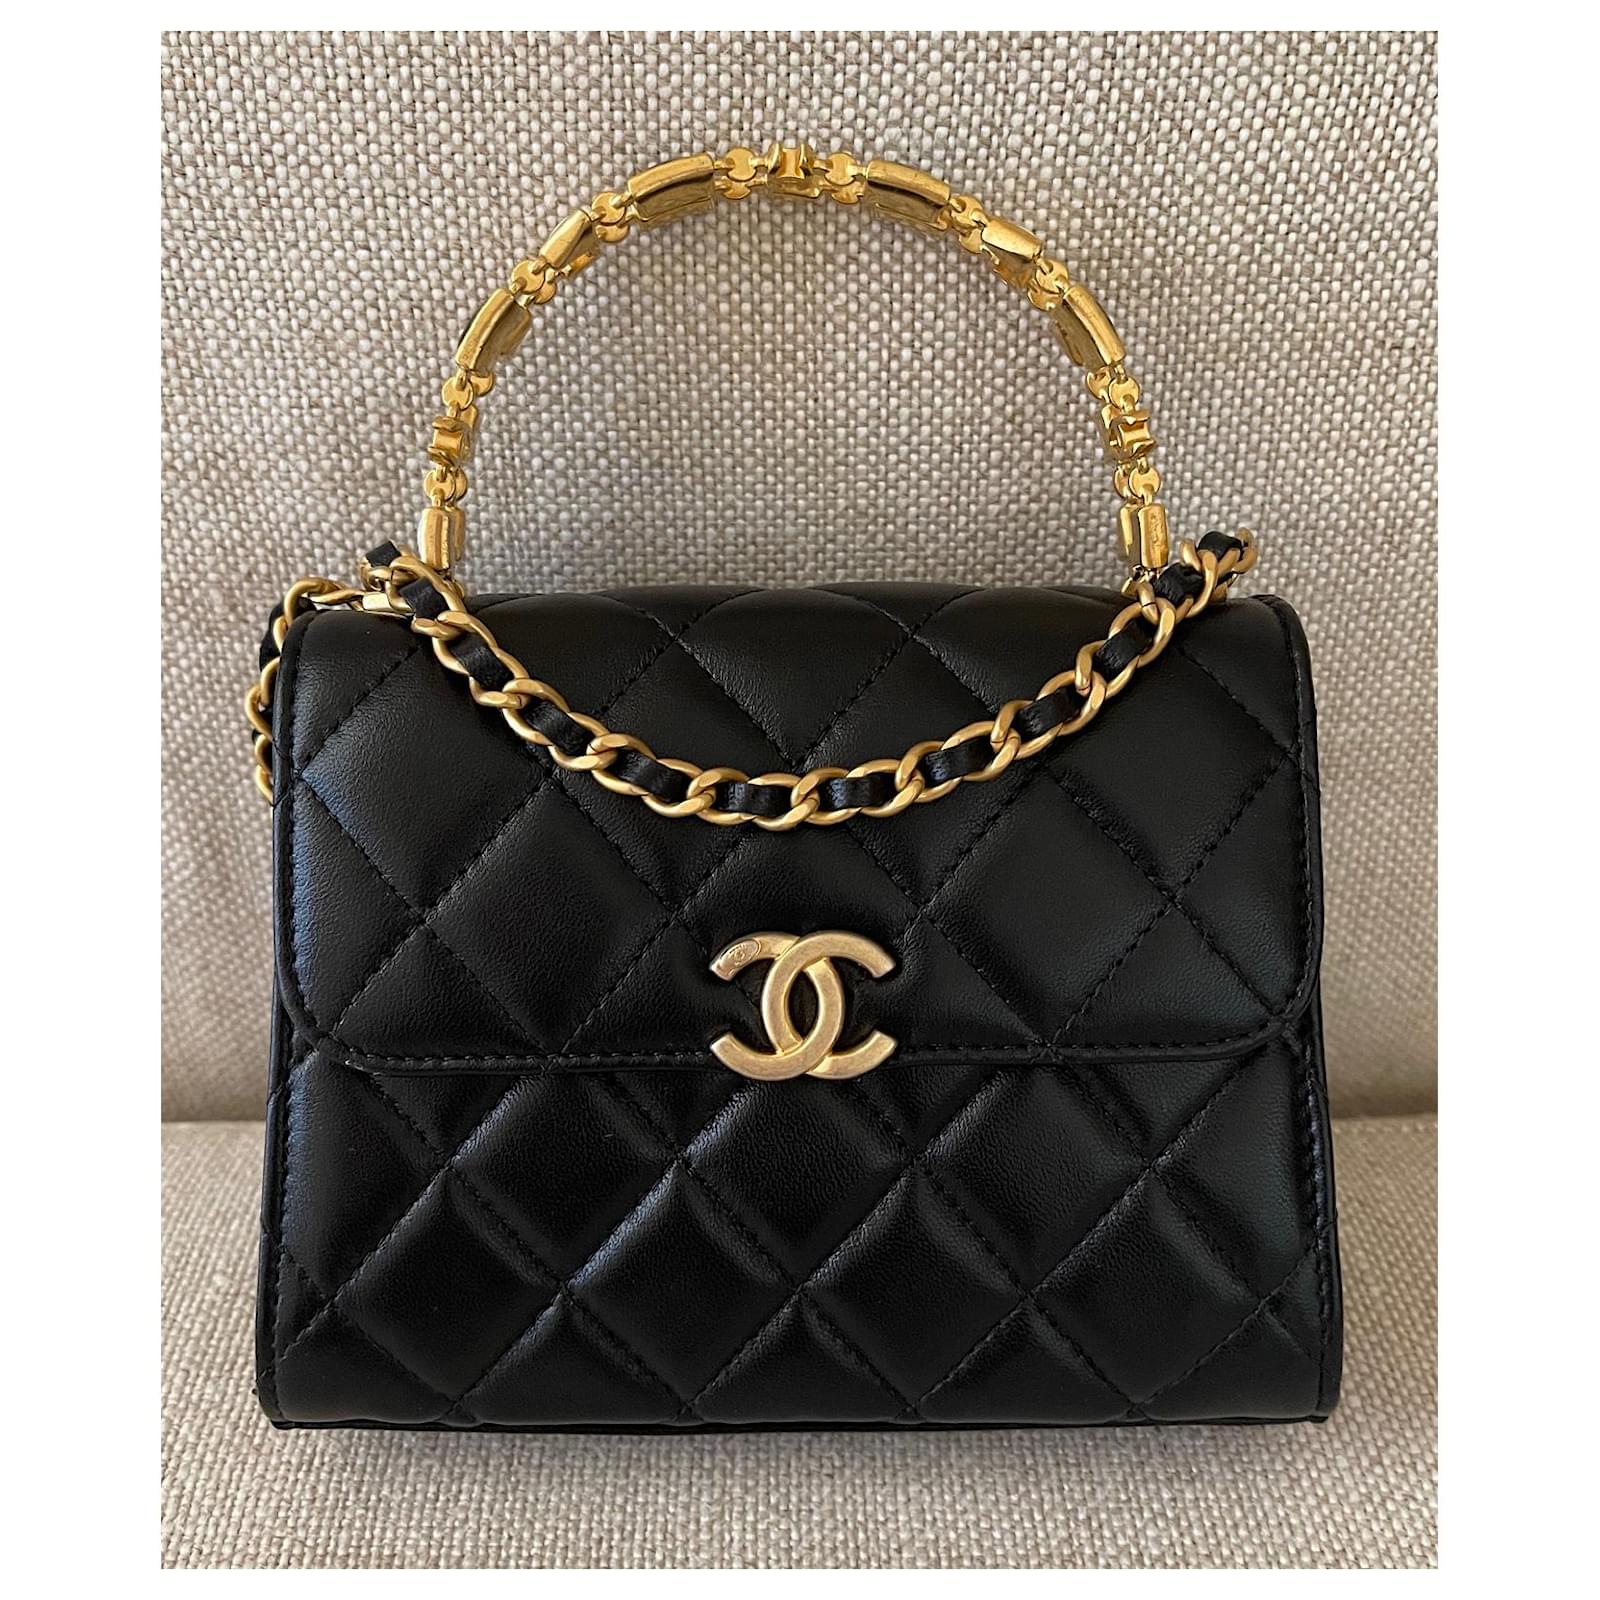 Clutch Bags Chanel Black Lambskin with Top Handle Flap Bag Clutch